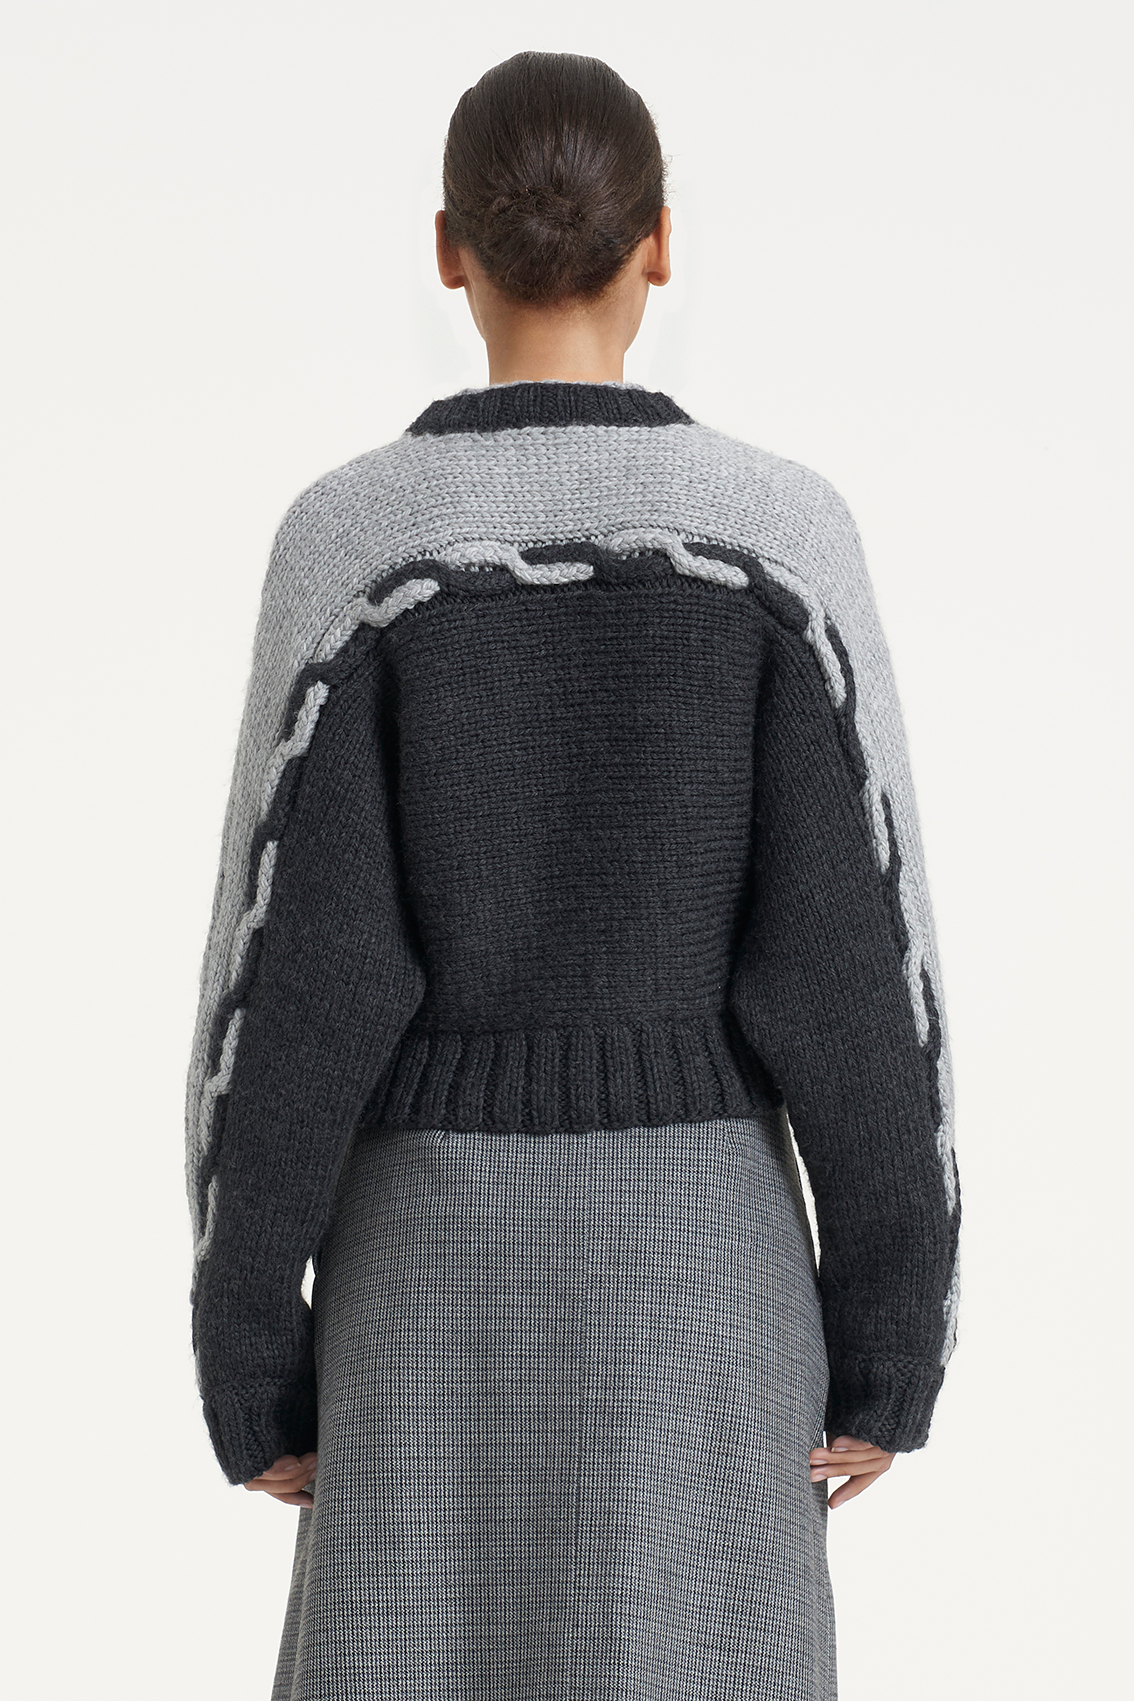 Grey And Black Braid Double Collar Knitted Pullover